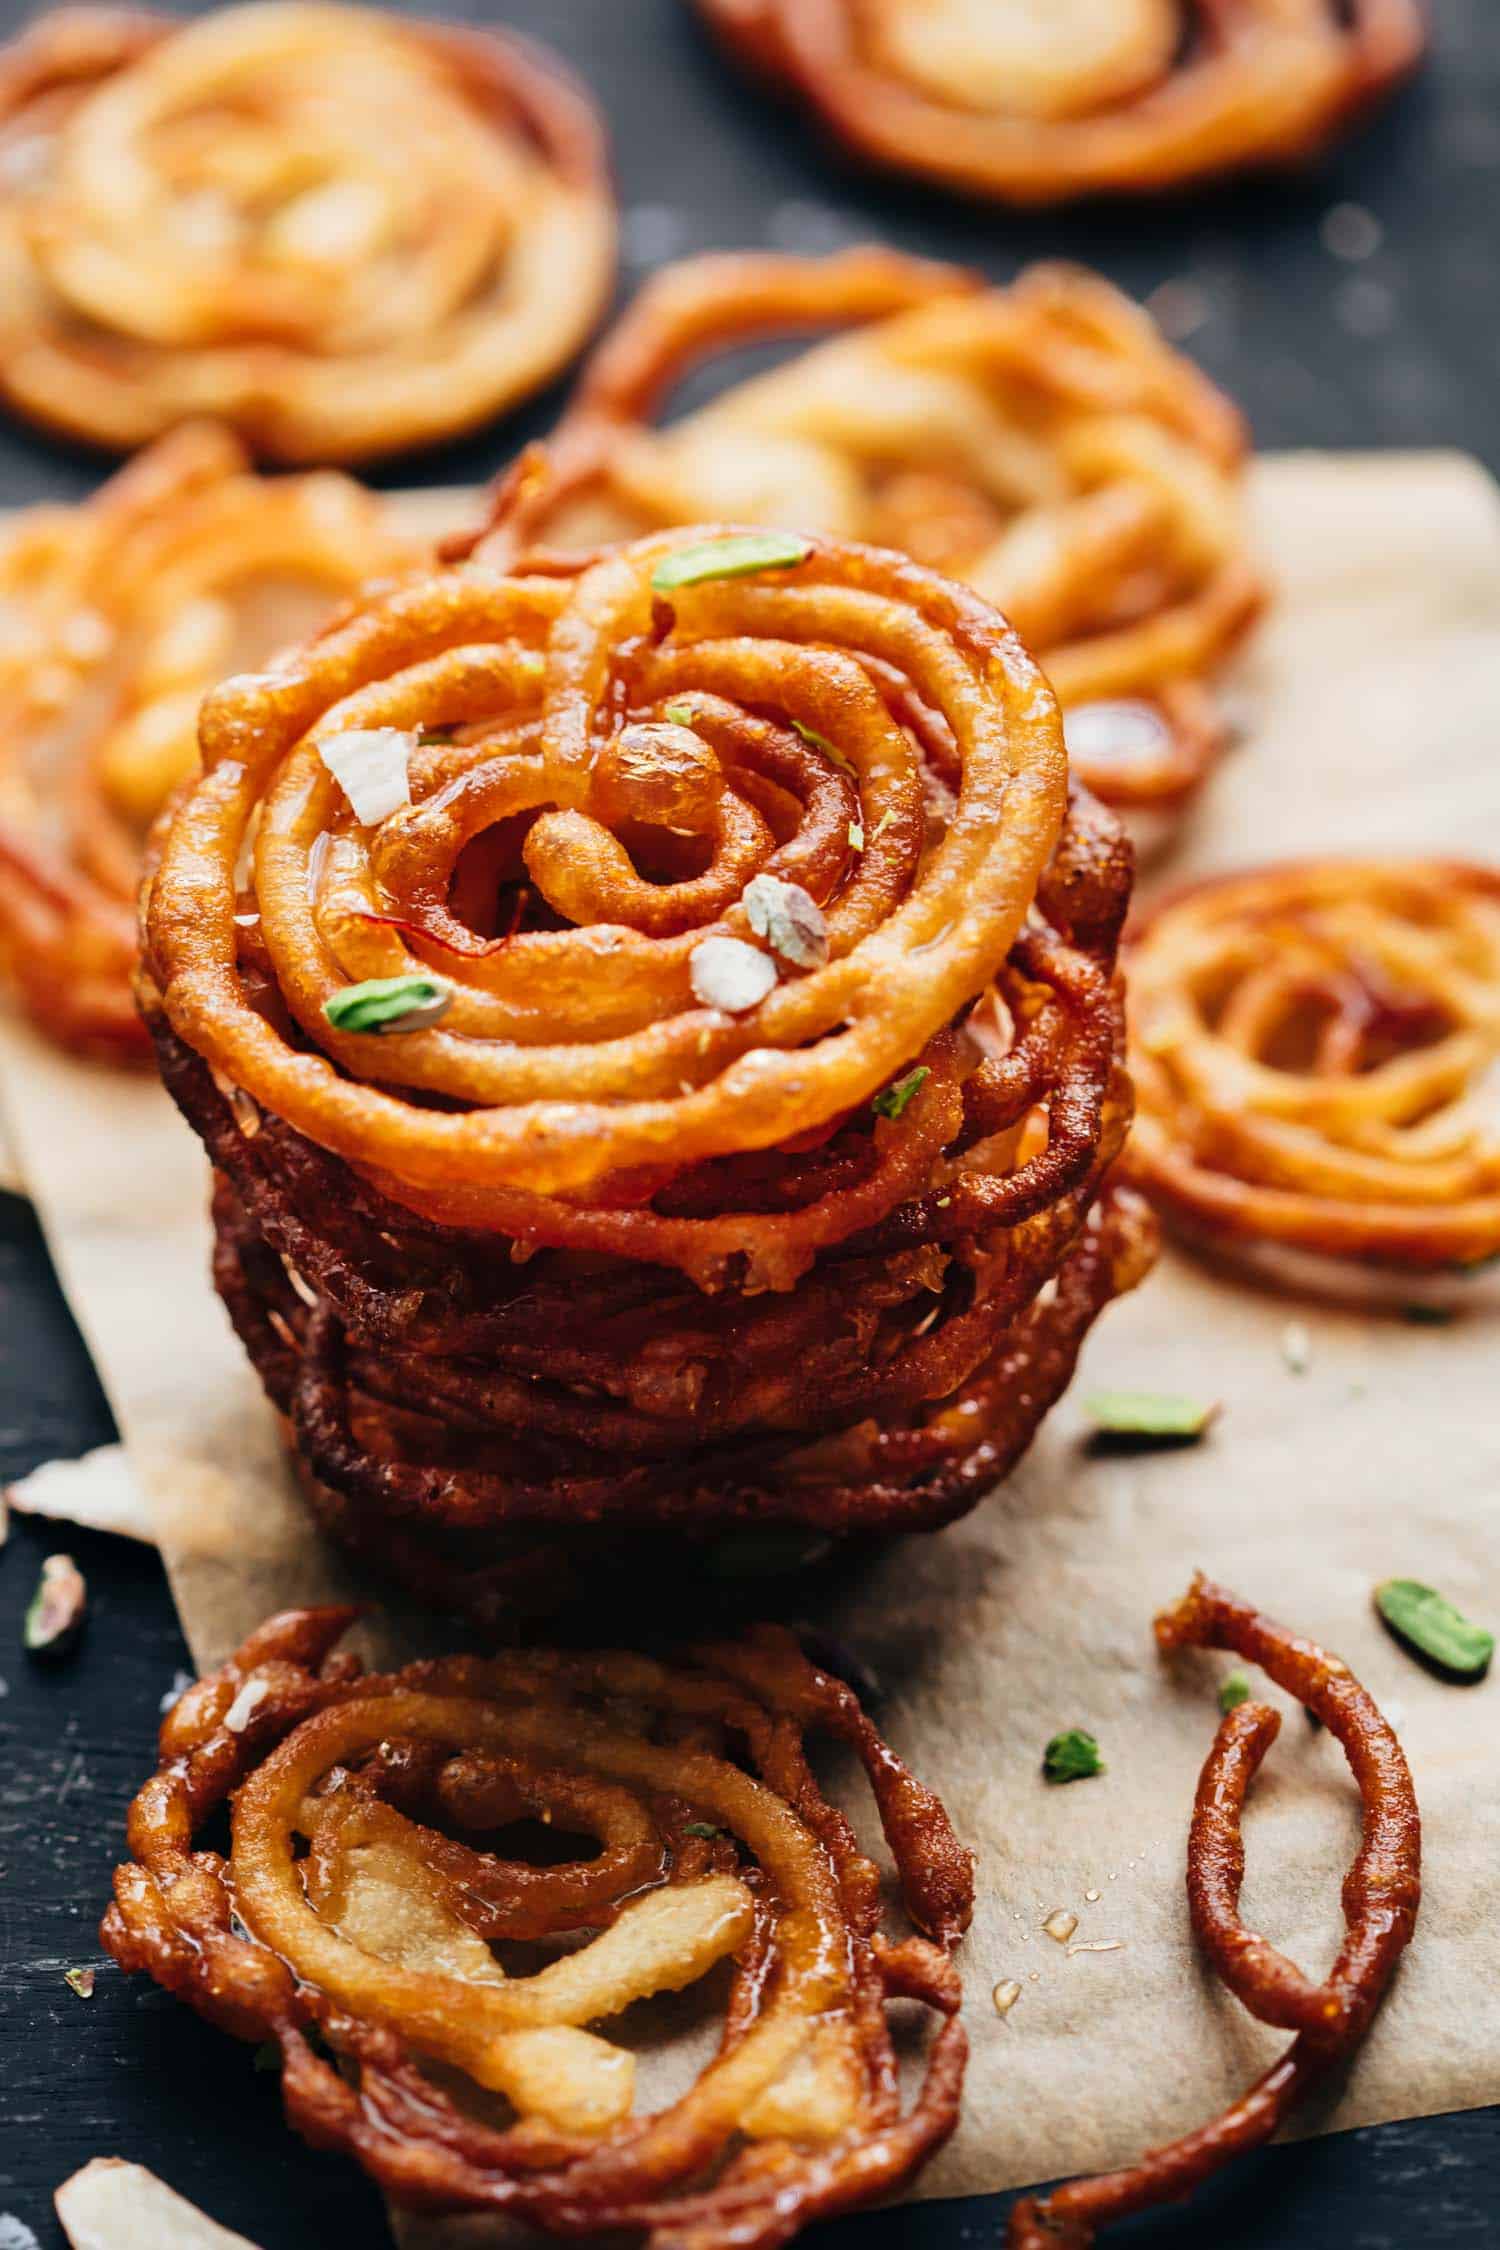 Jalebis stacked on top of each other